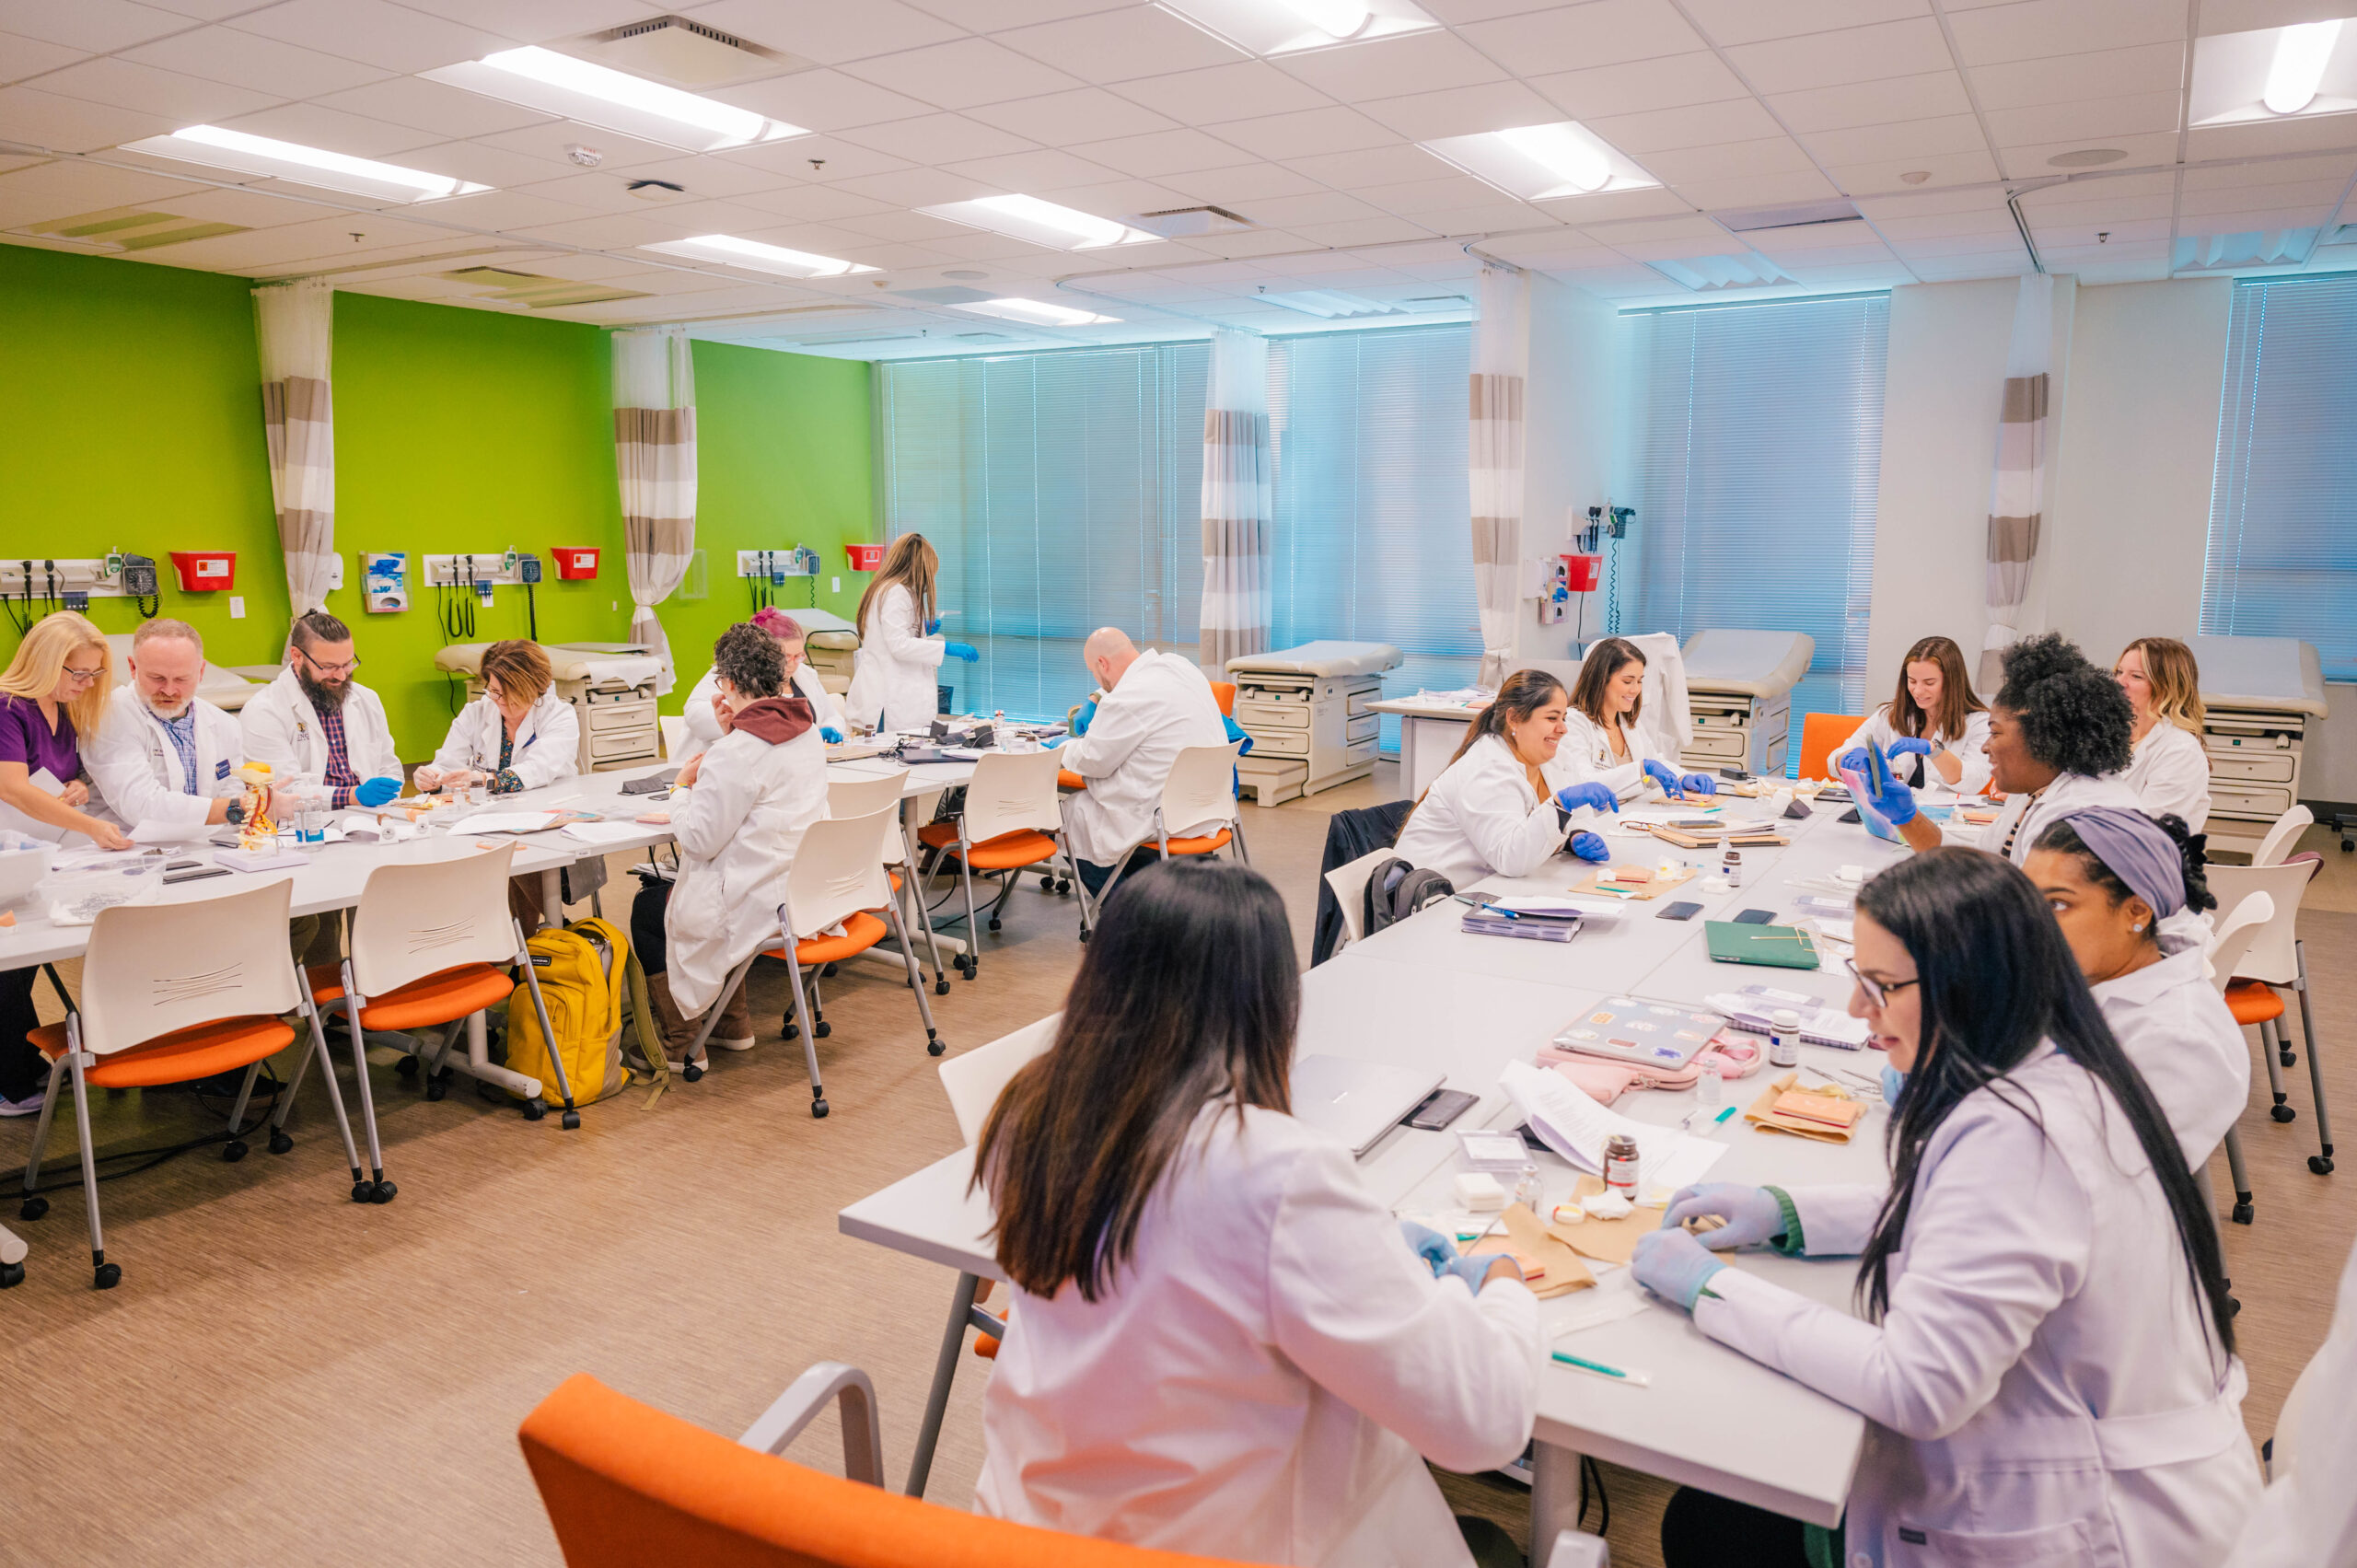 Nursing students in white lab coats practicing suturing at tables in a classroom together. 